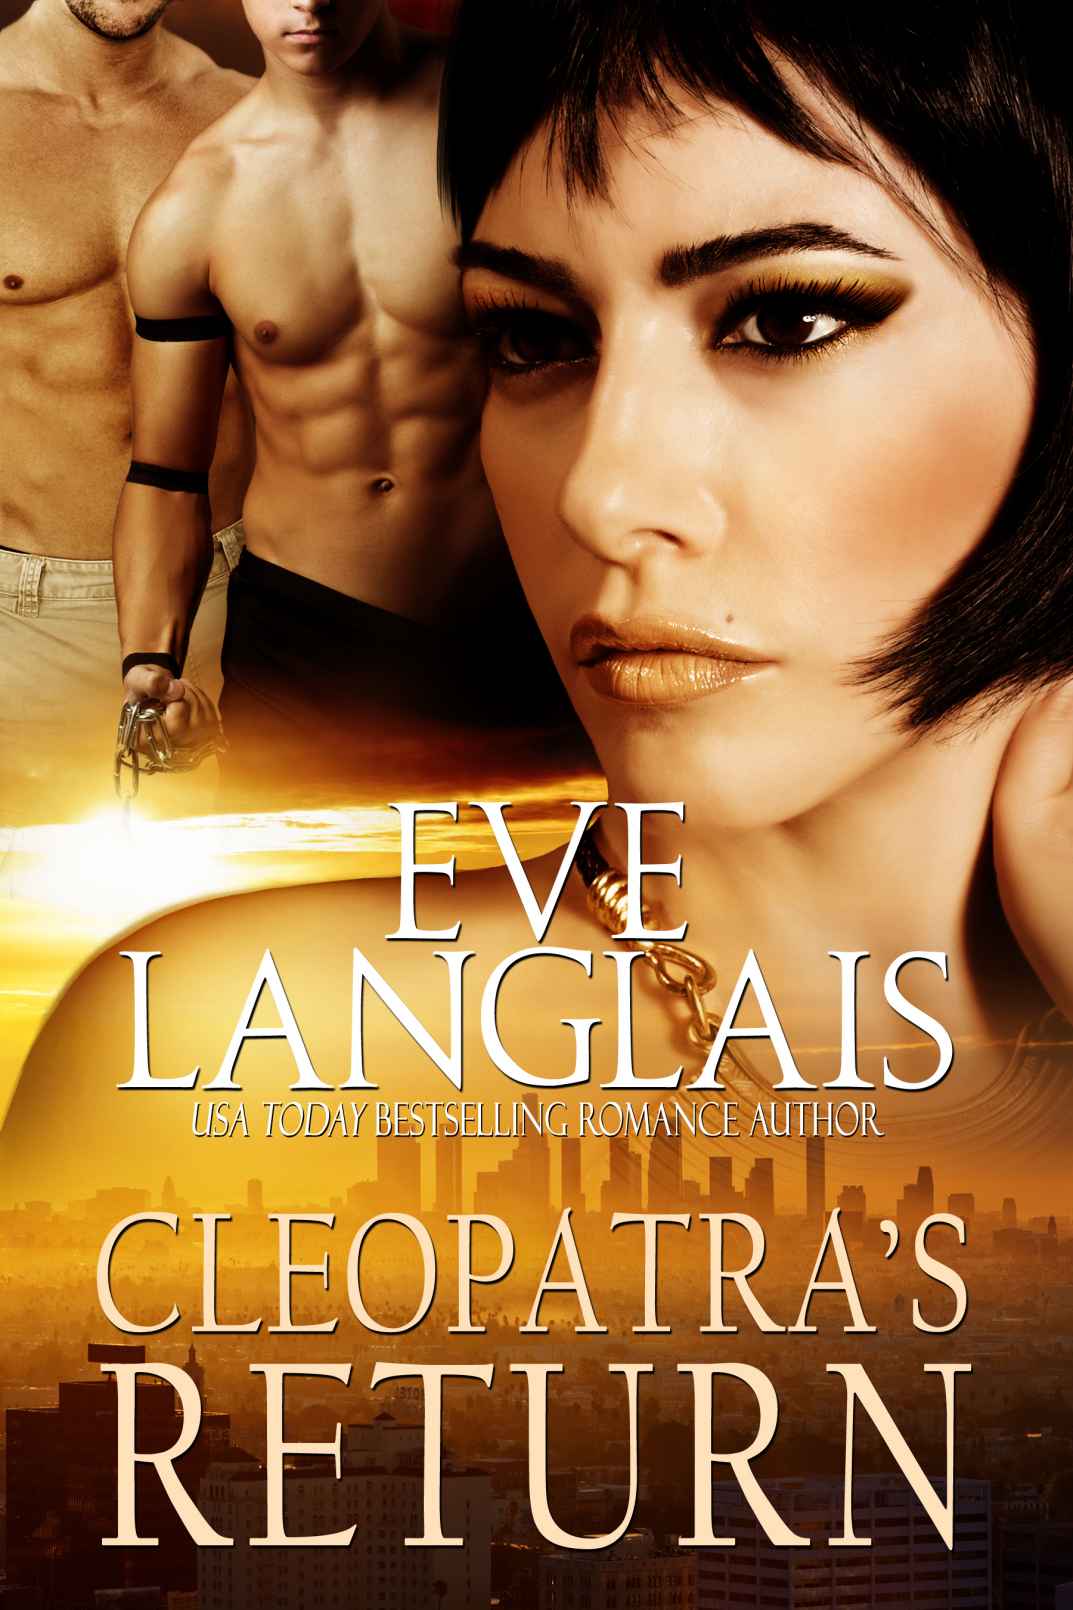 Cleopatra's Return: A Paranormal/Vampire Romance by Eve Langlais